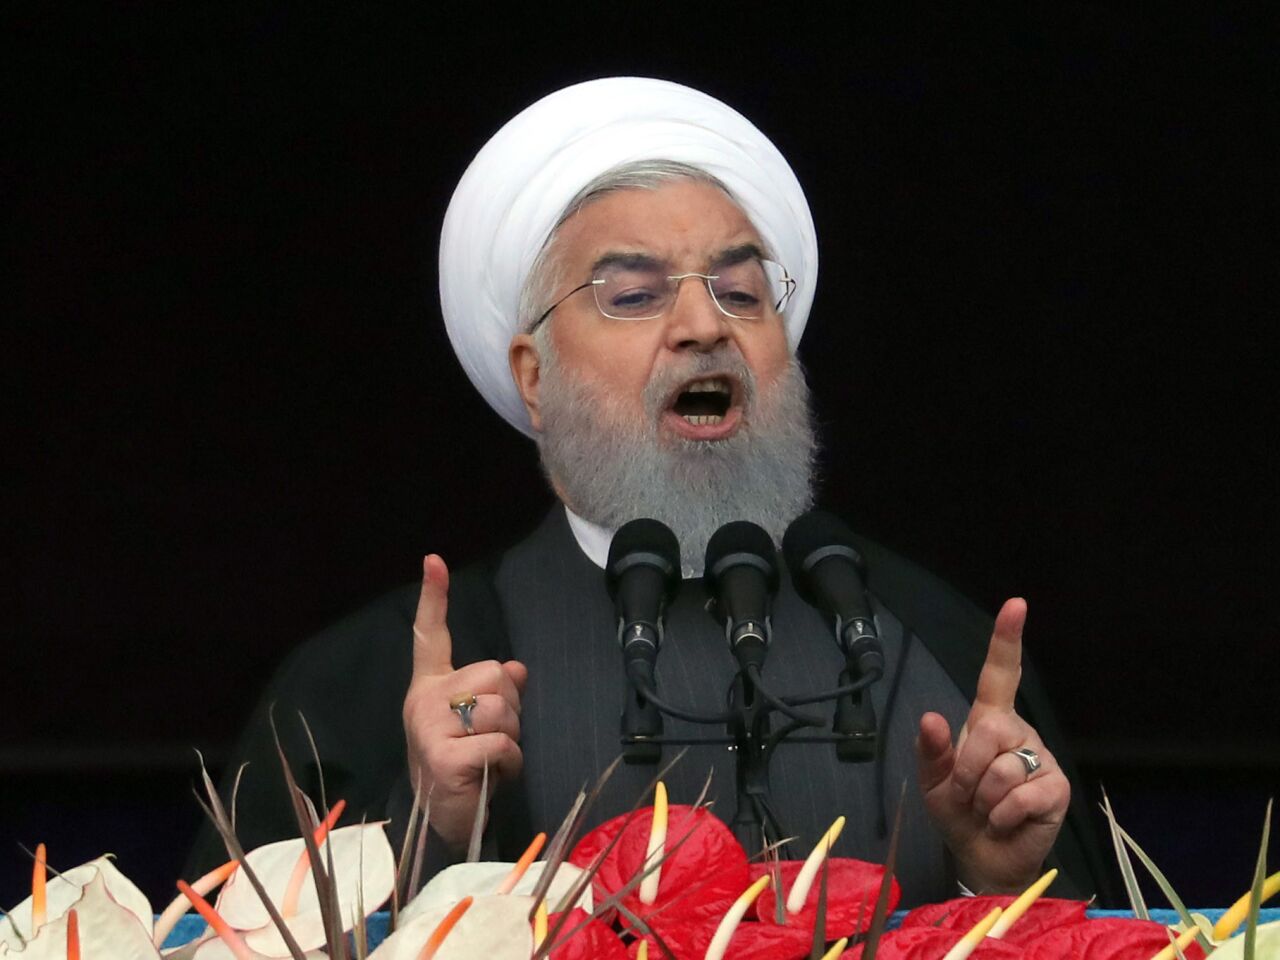 Iranian President Hassan Rouhani delivers his speech during a ceremony marking the 40th anniversary of the 1979 Islamic Revolution, at the Azadi (Freedom) square in Tehran.